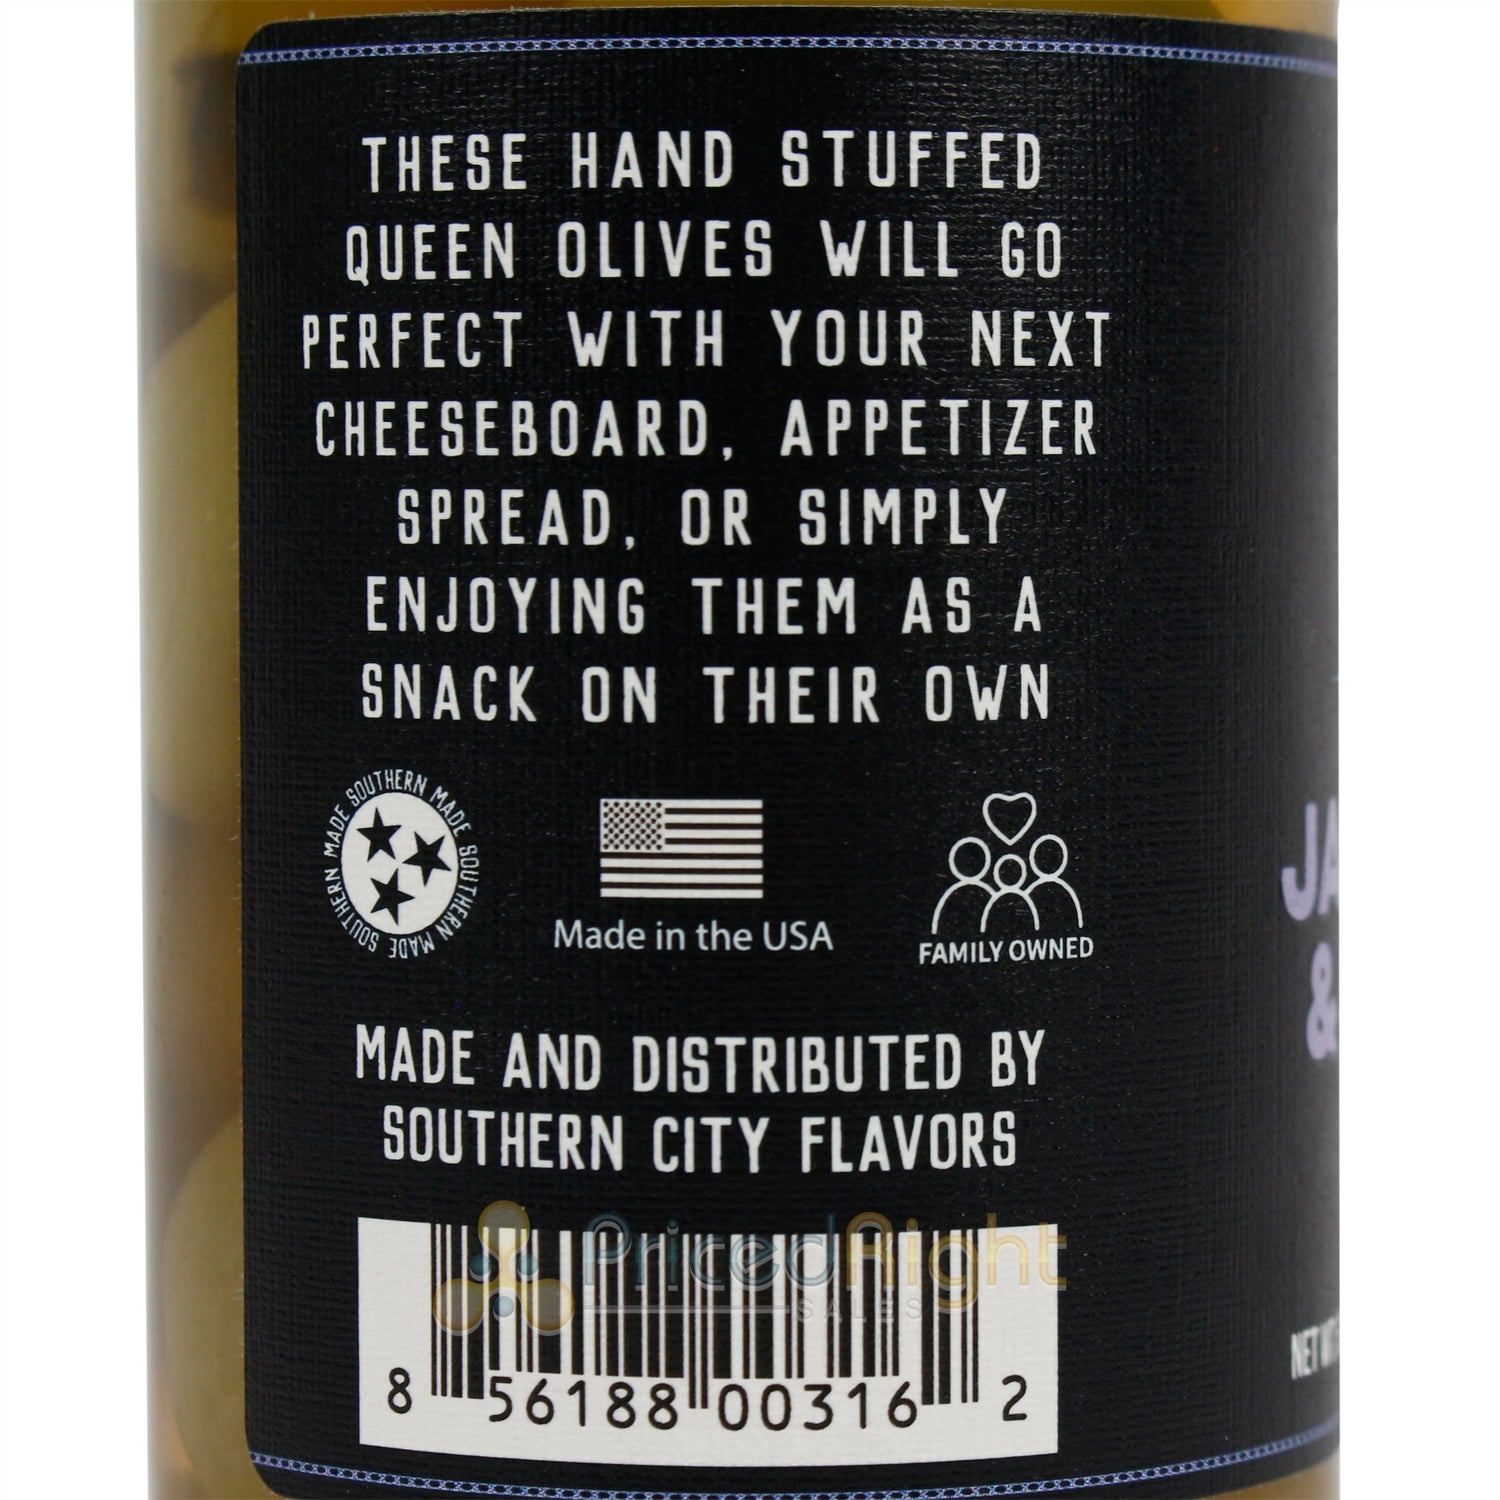 Southern City Flavors Garlic & Jalapeno Pitted Stuffed Olives Made In The USA